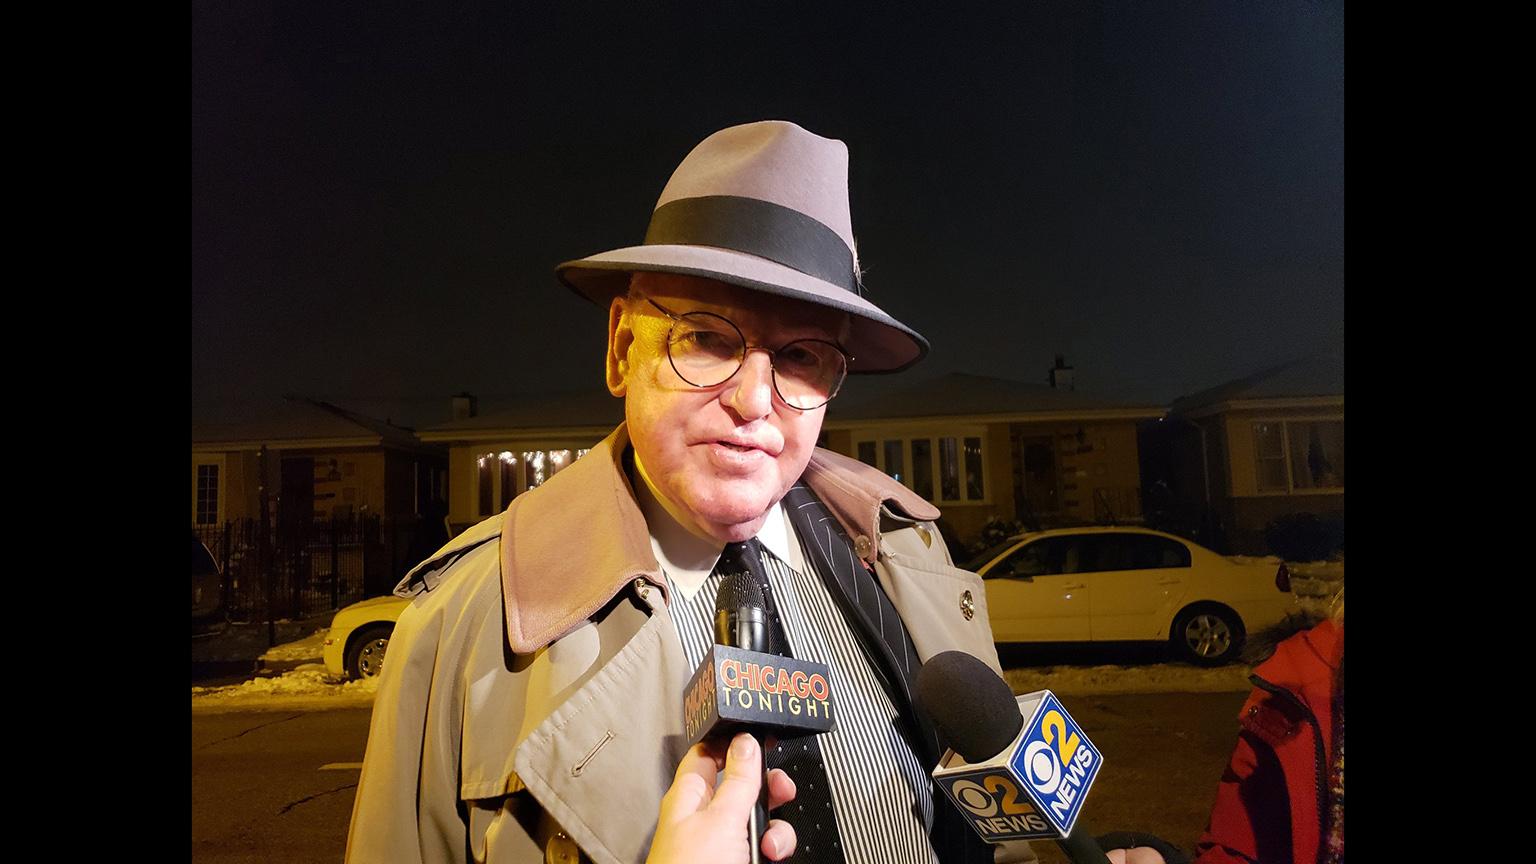 Ald. Ed Burke speaks with “Chicago Tonight” reporter Amanda Vinicky and other reporters outside his home on Thursday, Nov. 29, hours after FBI agents raided his offices. (WTTW News)